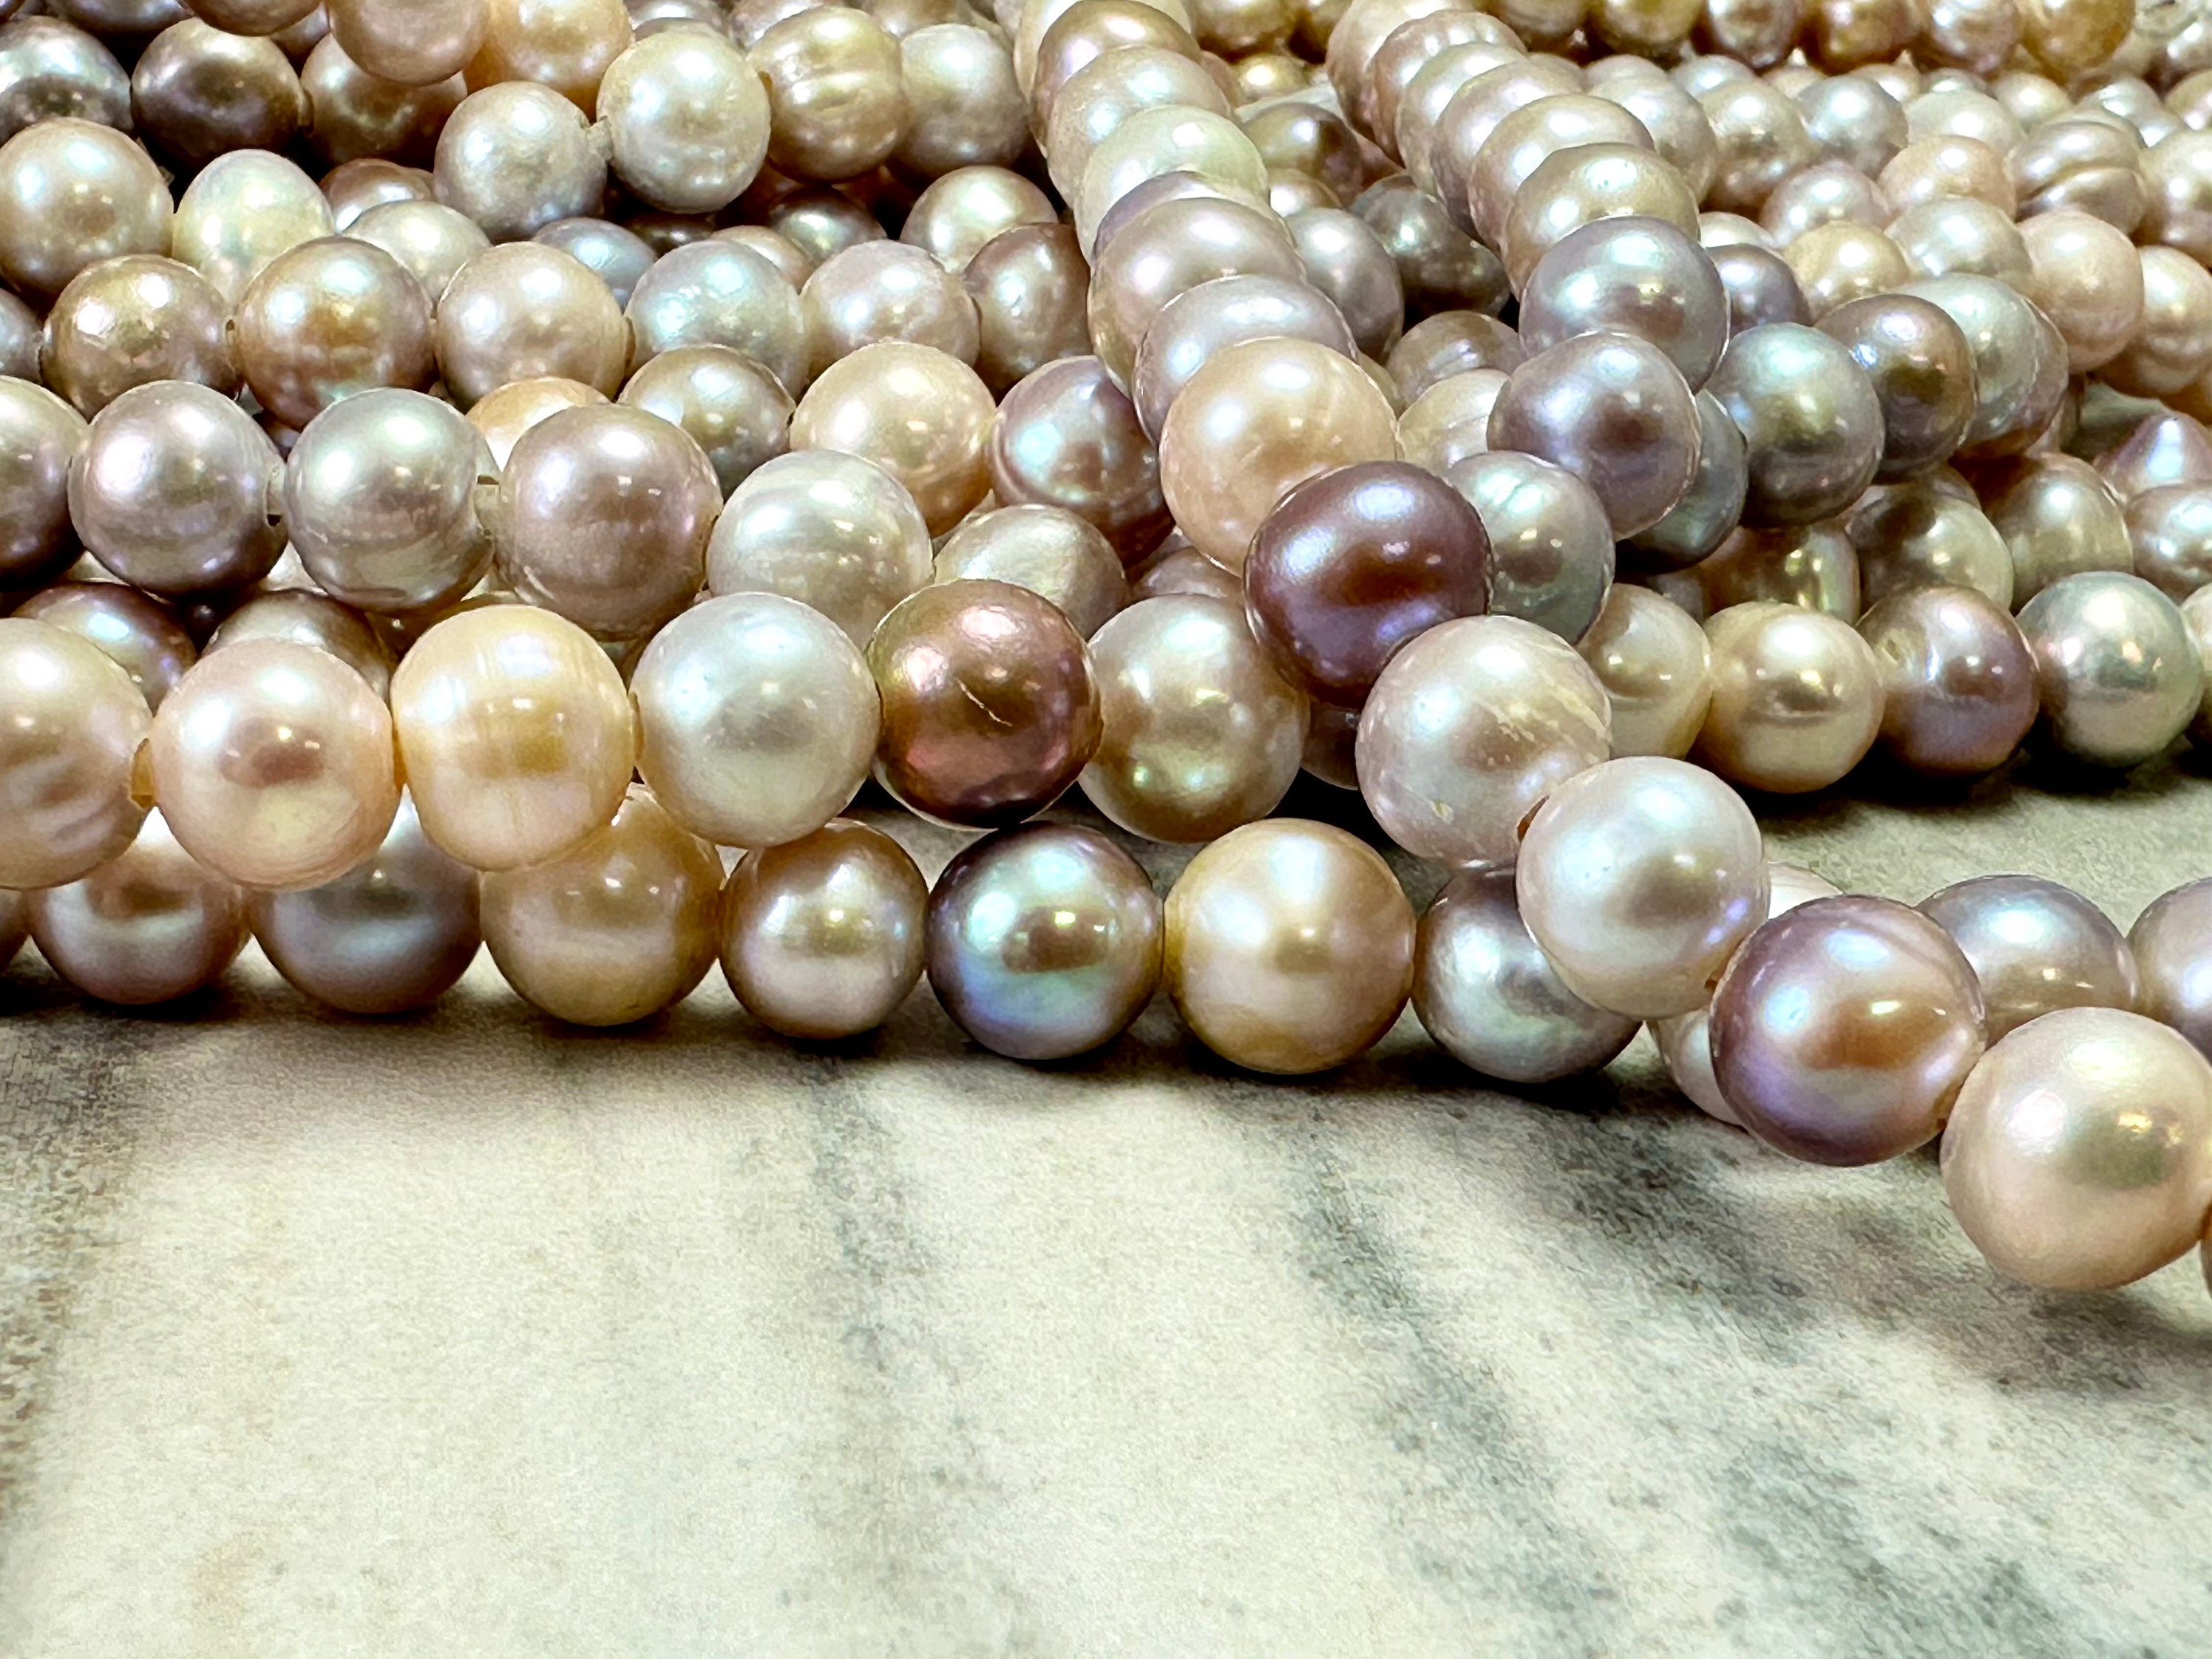 Uneven Pearls 44 Cm freshwater Pearls Pearl Necklacepearl -  UK